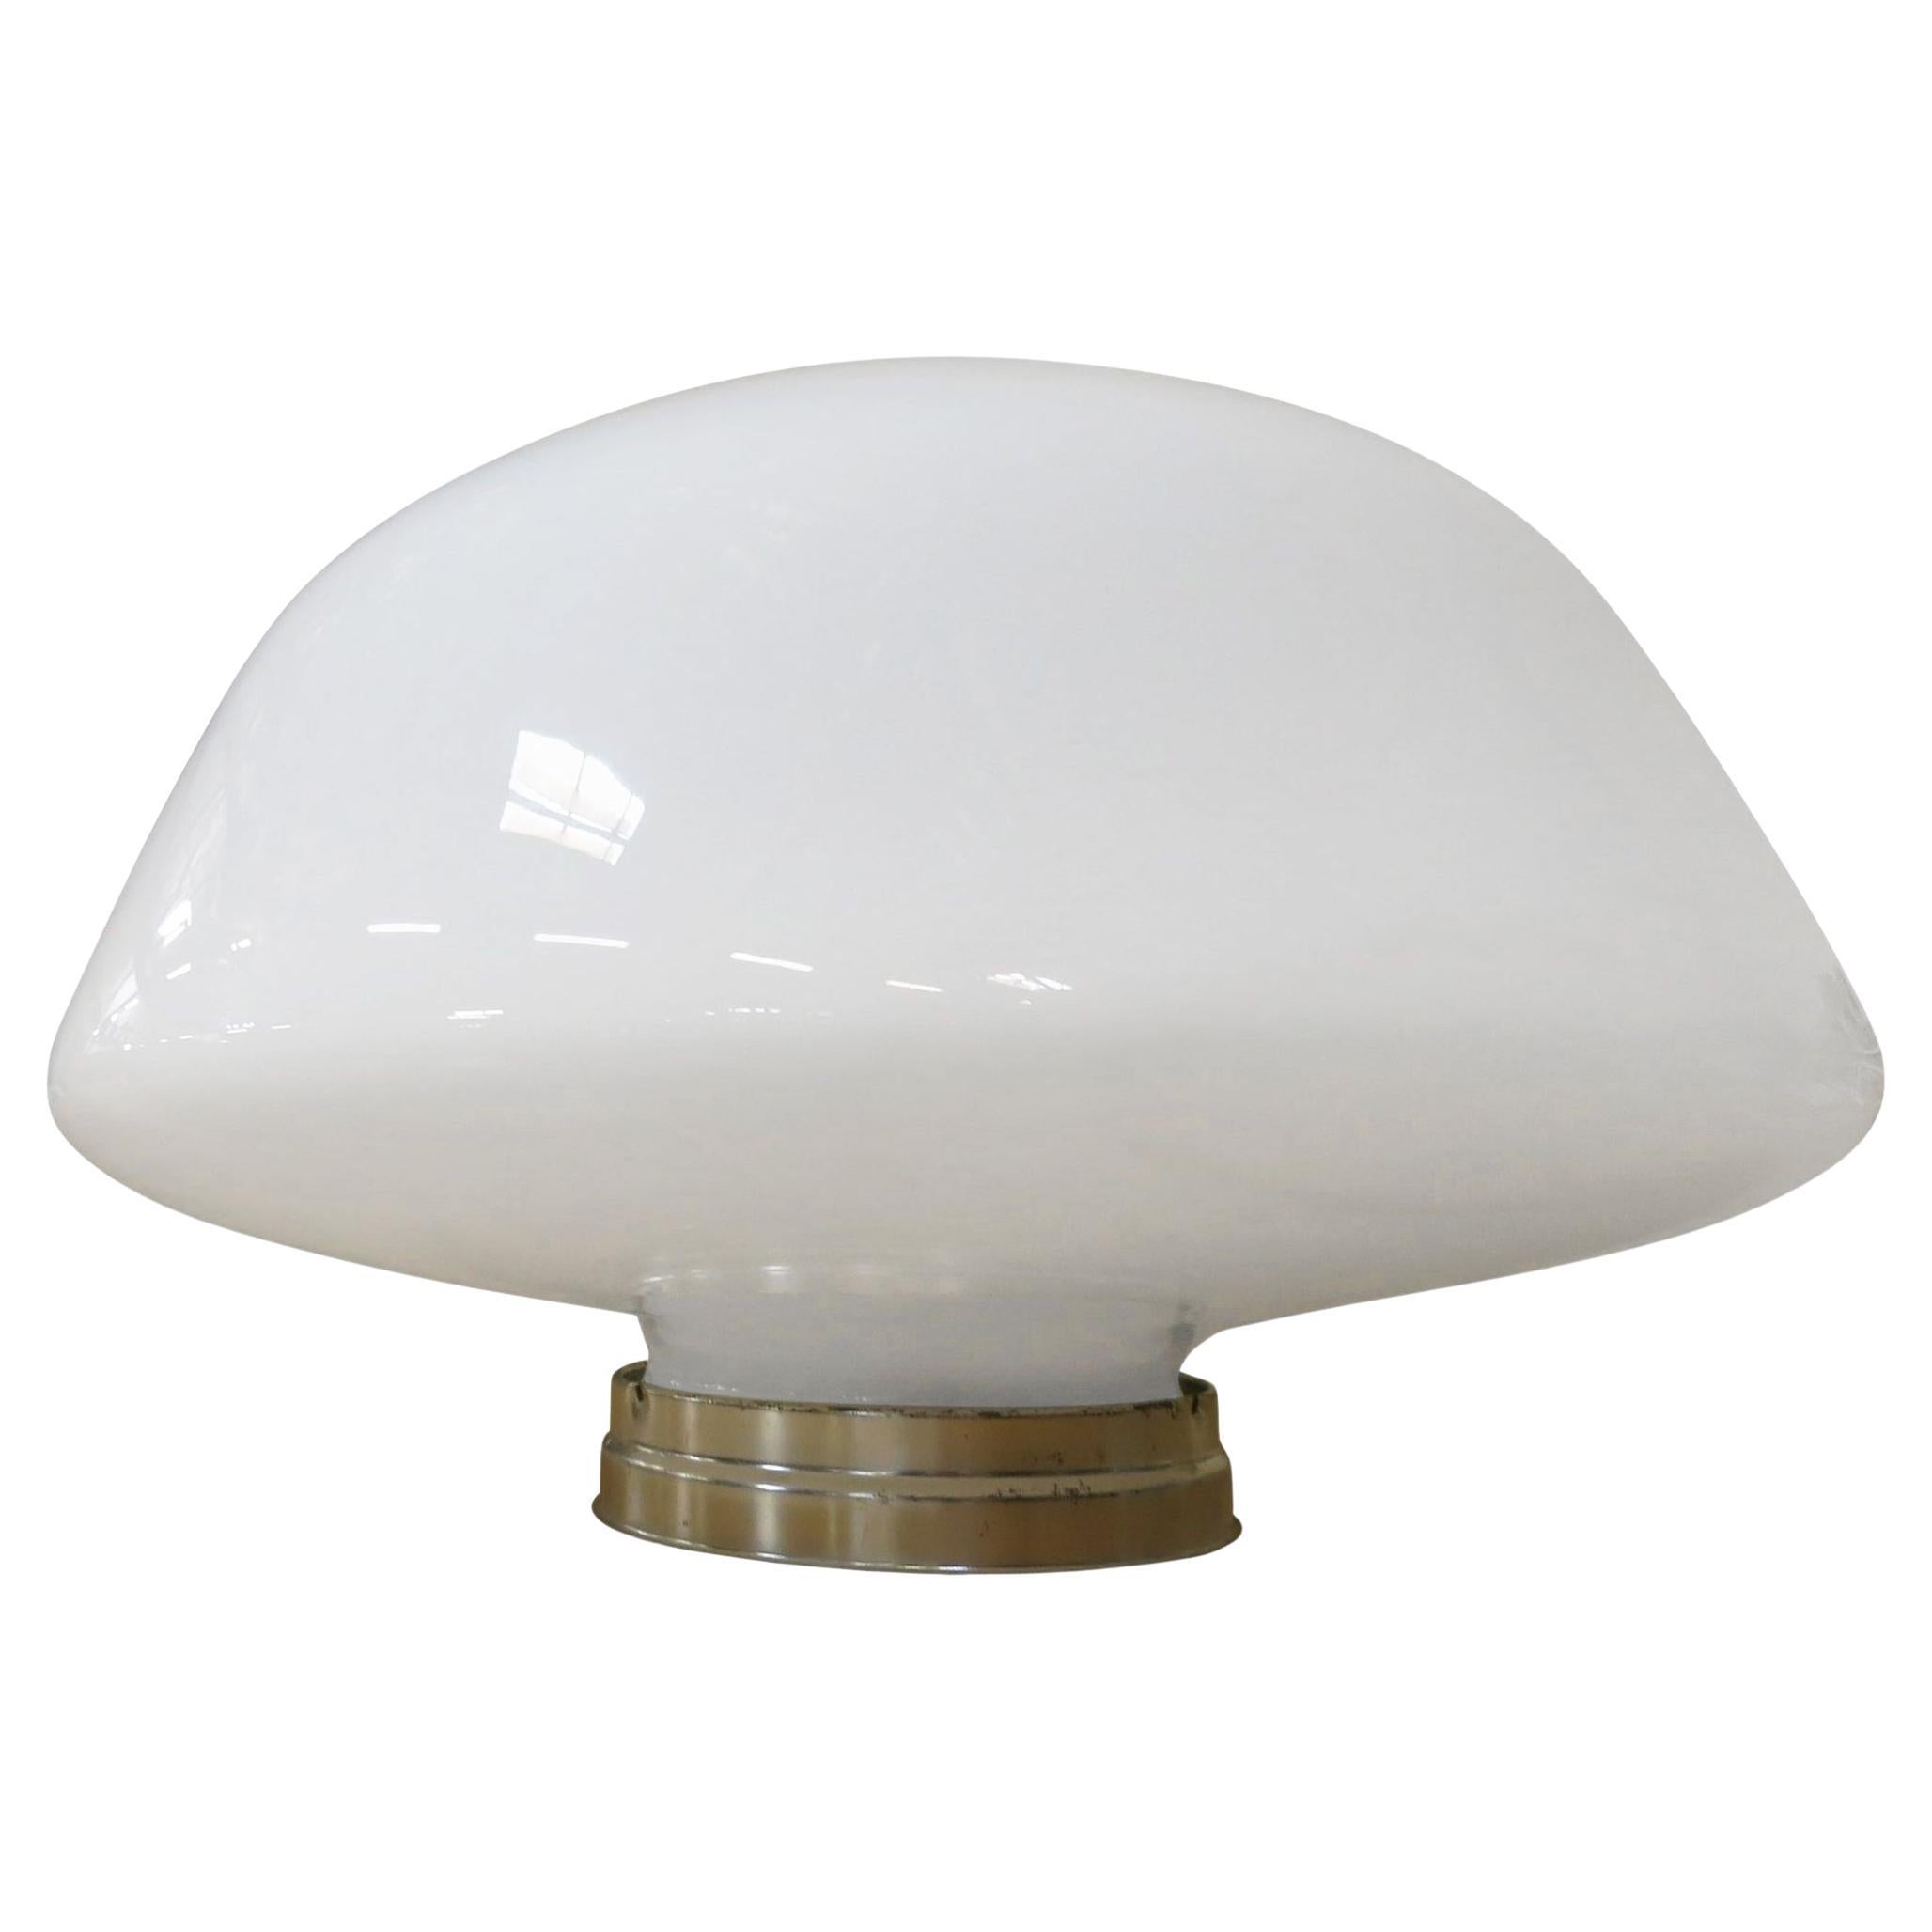 Large Art Deco School House Milk Glass Ceiling Mounted Globe with Fitter For Sale